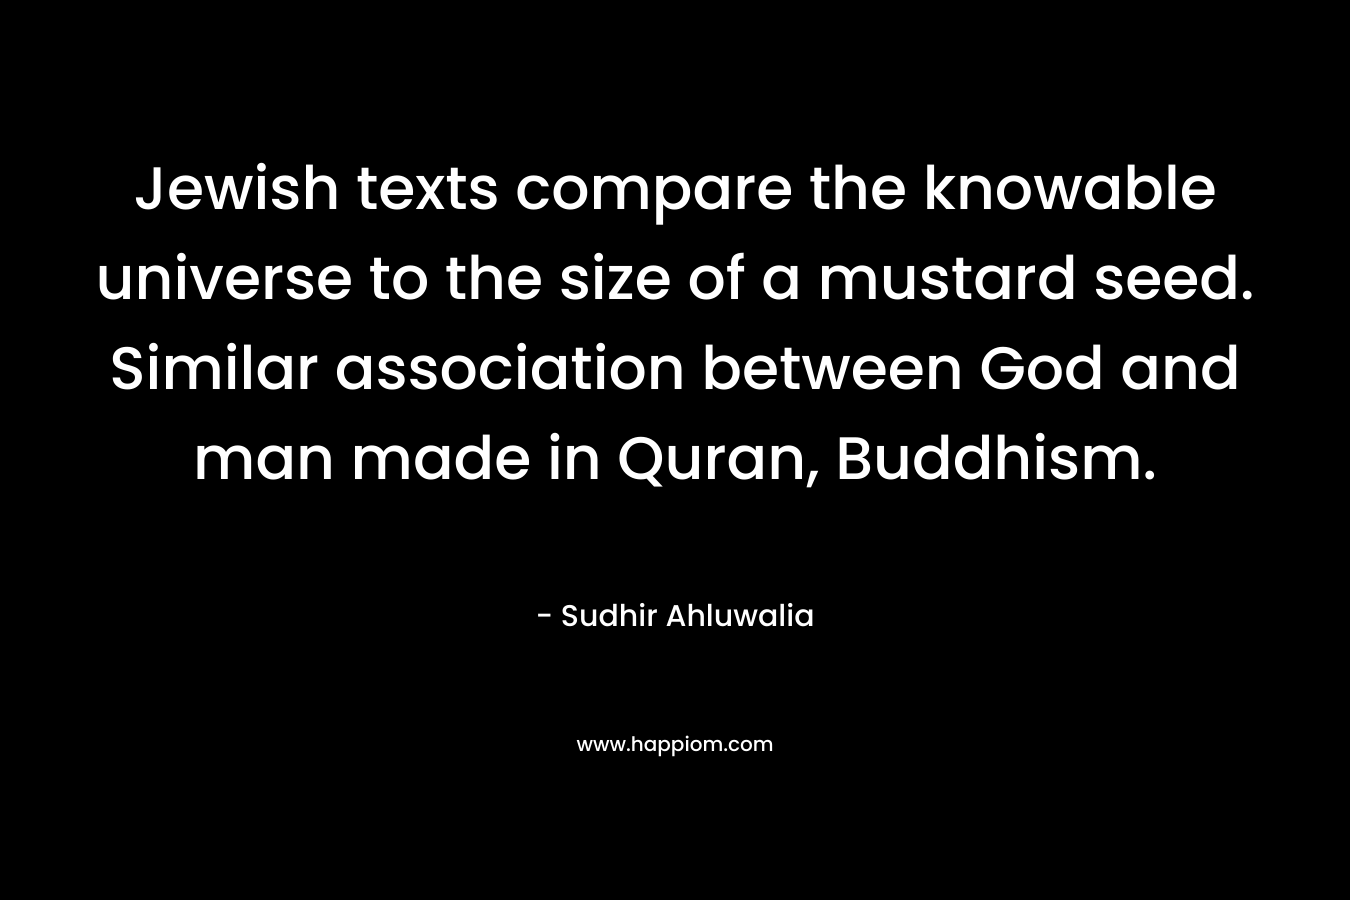 Jewish texts compare the knowable universe to the size of a mustard seed. Similar association between God and man made in Quran, Buddhism.